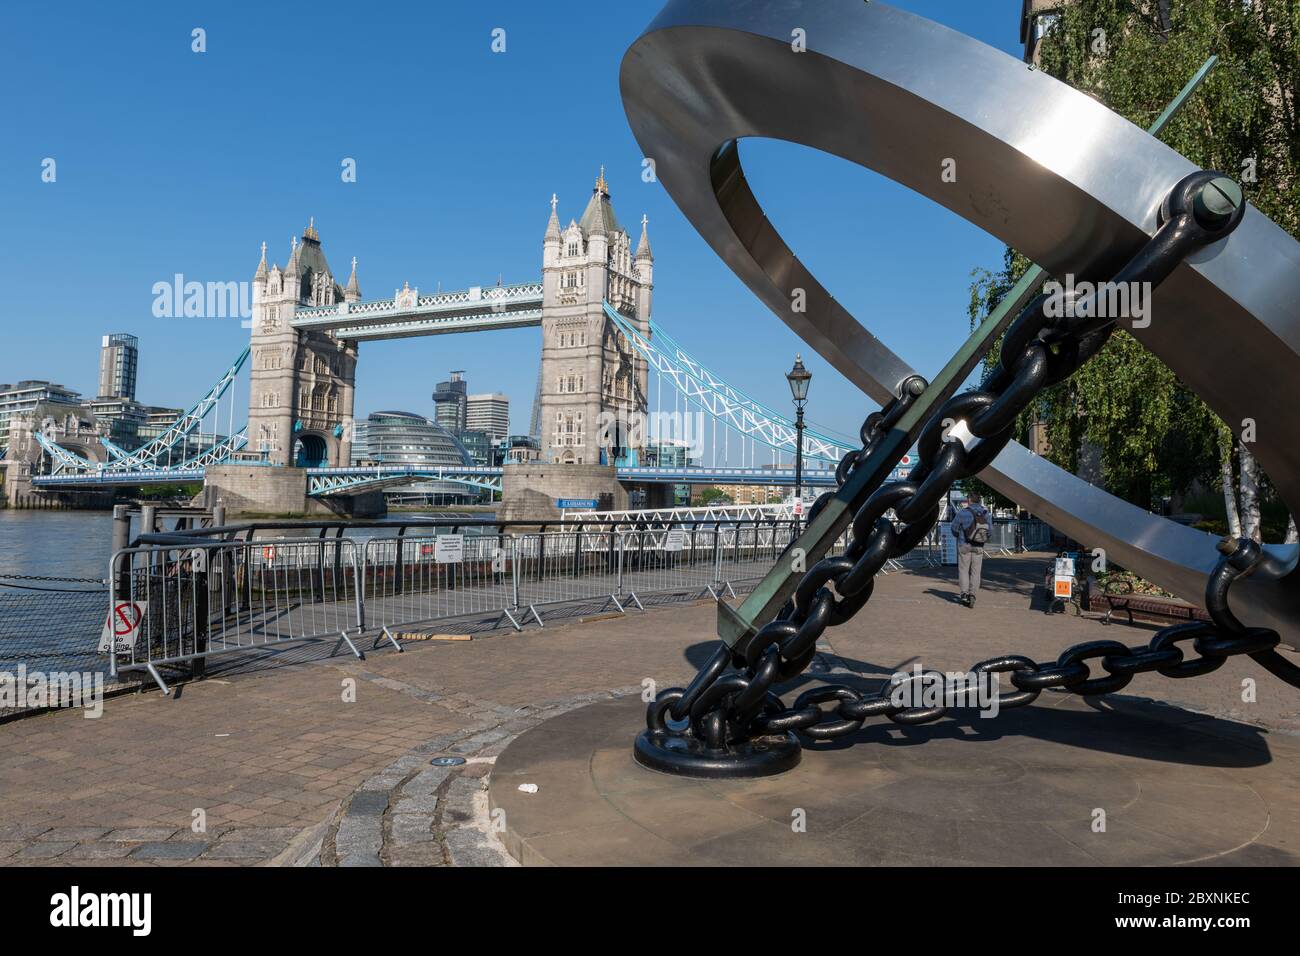 The Timepiece Sundial sculpture in  the north bank of the Thames river with a view of Tower Bridge in the background. Stock Photo